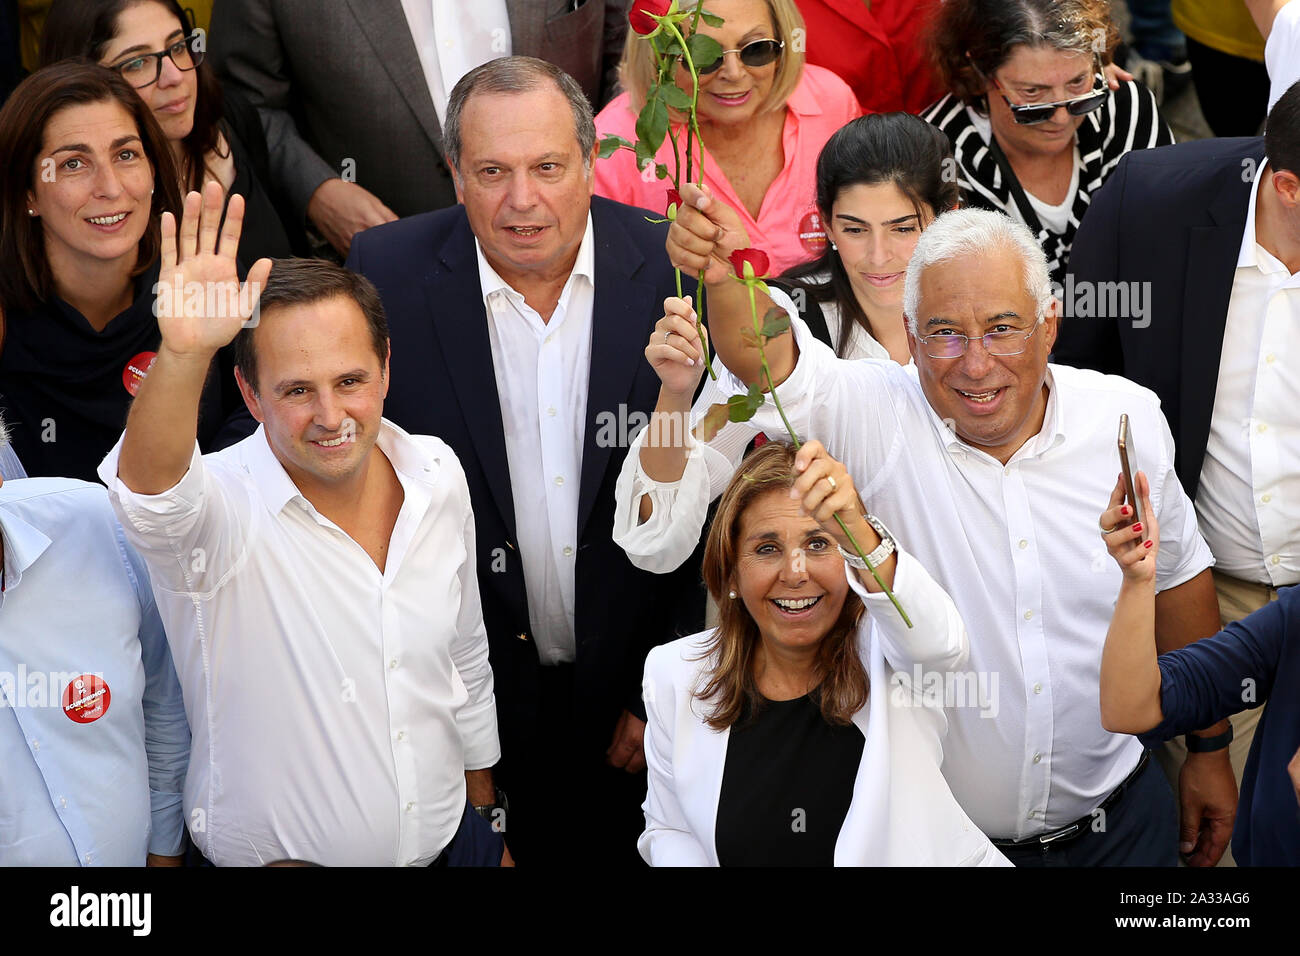 Lisbon, Portugal on Oct. 4. 6th Oct, 2019. Portuguese Prime Minister and leader of the Socialist Party Antonio Costa (front R) greets supporters with his wife Fernanda Tadeu (front) and Mayor of Lisbon Fernando Medina (front L) during a campaign rally in Lisbon, Portugal on Oct. 4, 2019. The Portuguese general elections will be held on Oct. 6, 2019. Credit: Pedro Fiuza/Xinhua/Alamy Live News Stock Photo